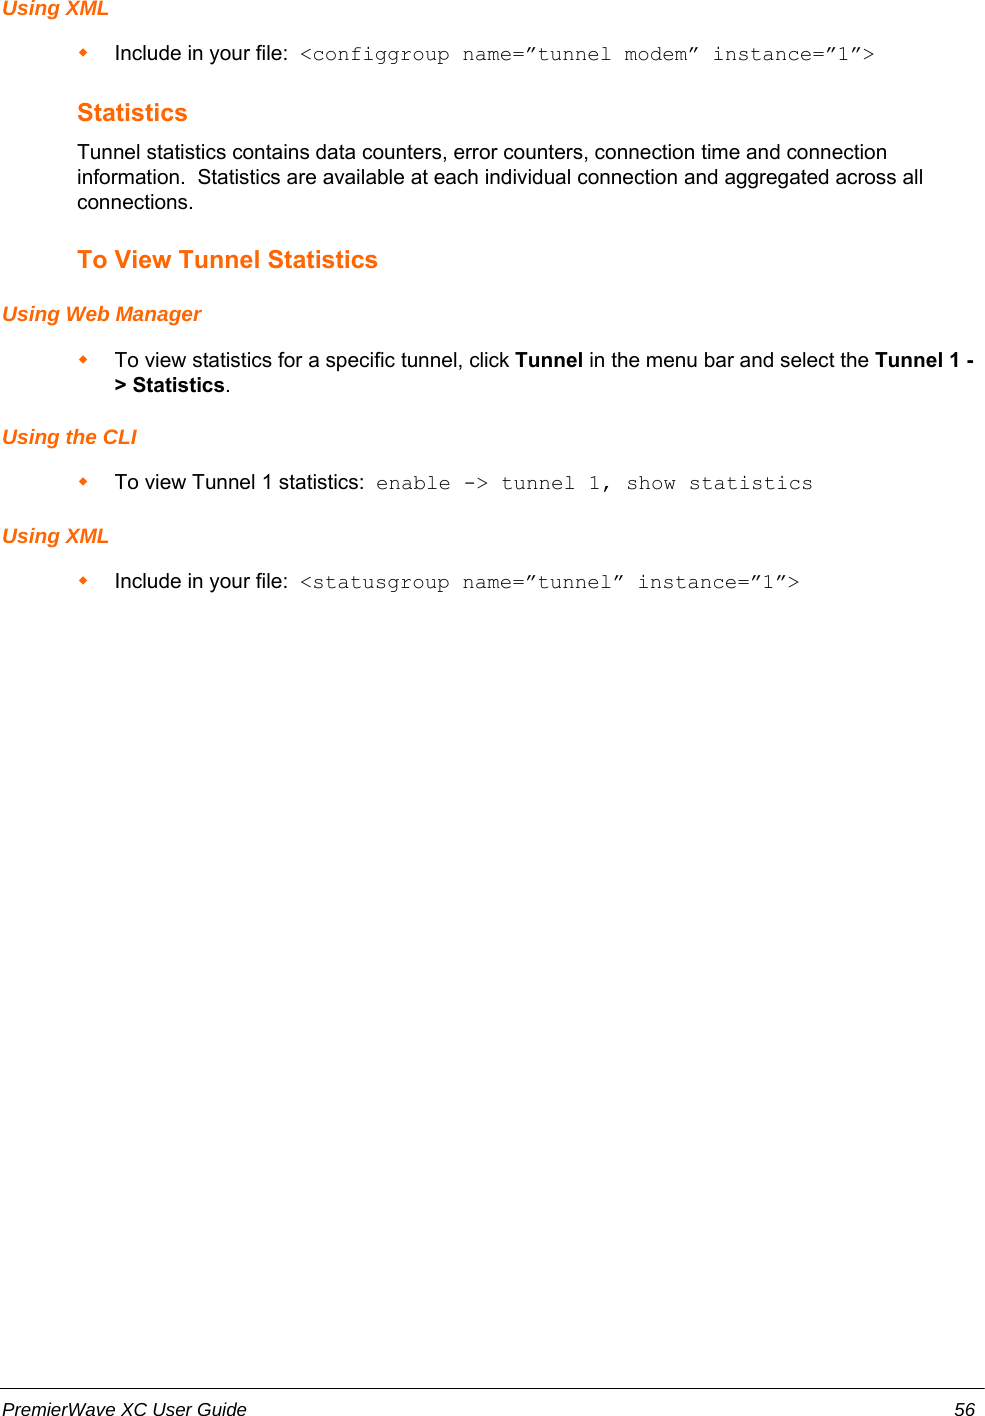 Using XMLInclude in your file:  &lt;configgroup name=”tunnel modem” instance=”1”&gt;StatisticsTunnel statistics contains data counters, error counters, connection time and connectioninformation.  Statistics are available at each individual connection and aggregated across allconnections.To View Tunnel StatisticsUsing Web ManagerTo view statistics for a specific tunnel, click Tunnel in the menu bar and select the Tunnel 1 -&gt; Statistics.Using the CLITo view Tunnel 1 statistics:  enable -&gt; tunnel 1, show statisticsUsing XMLInclude in your file:  &lt;statusgroup name=”tunnel” instance=”1”&gt;PremierWave XC User Guide 56